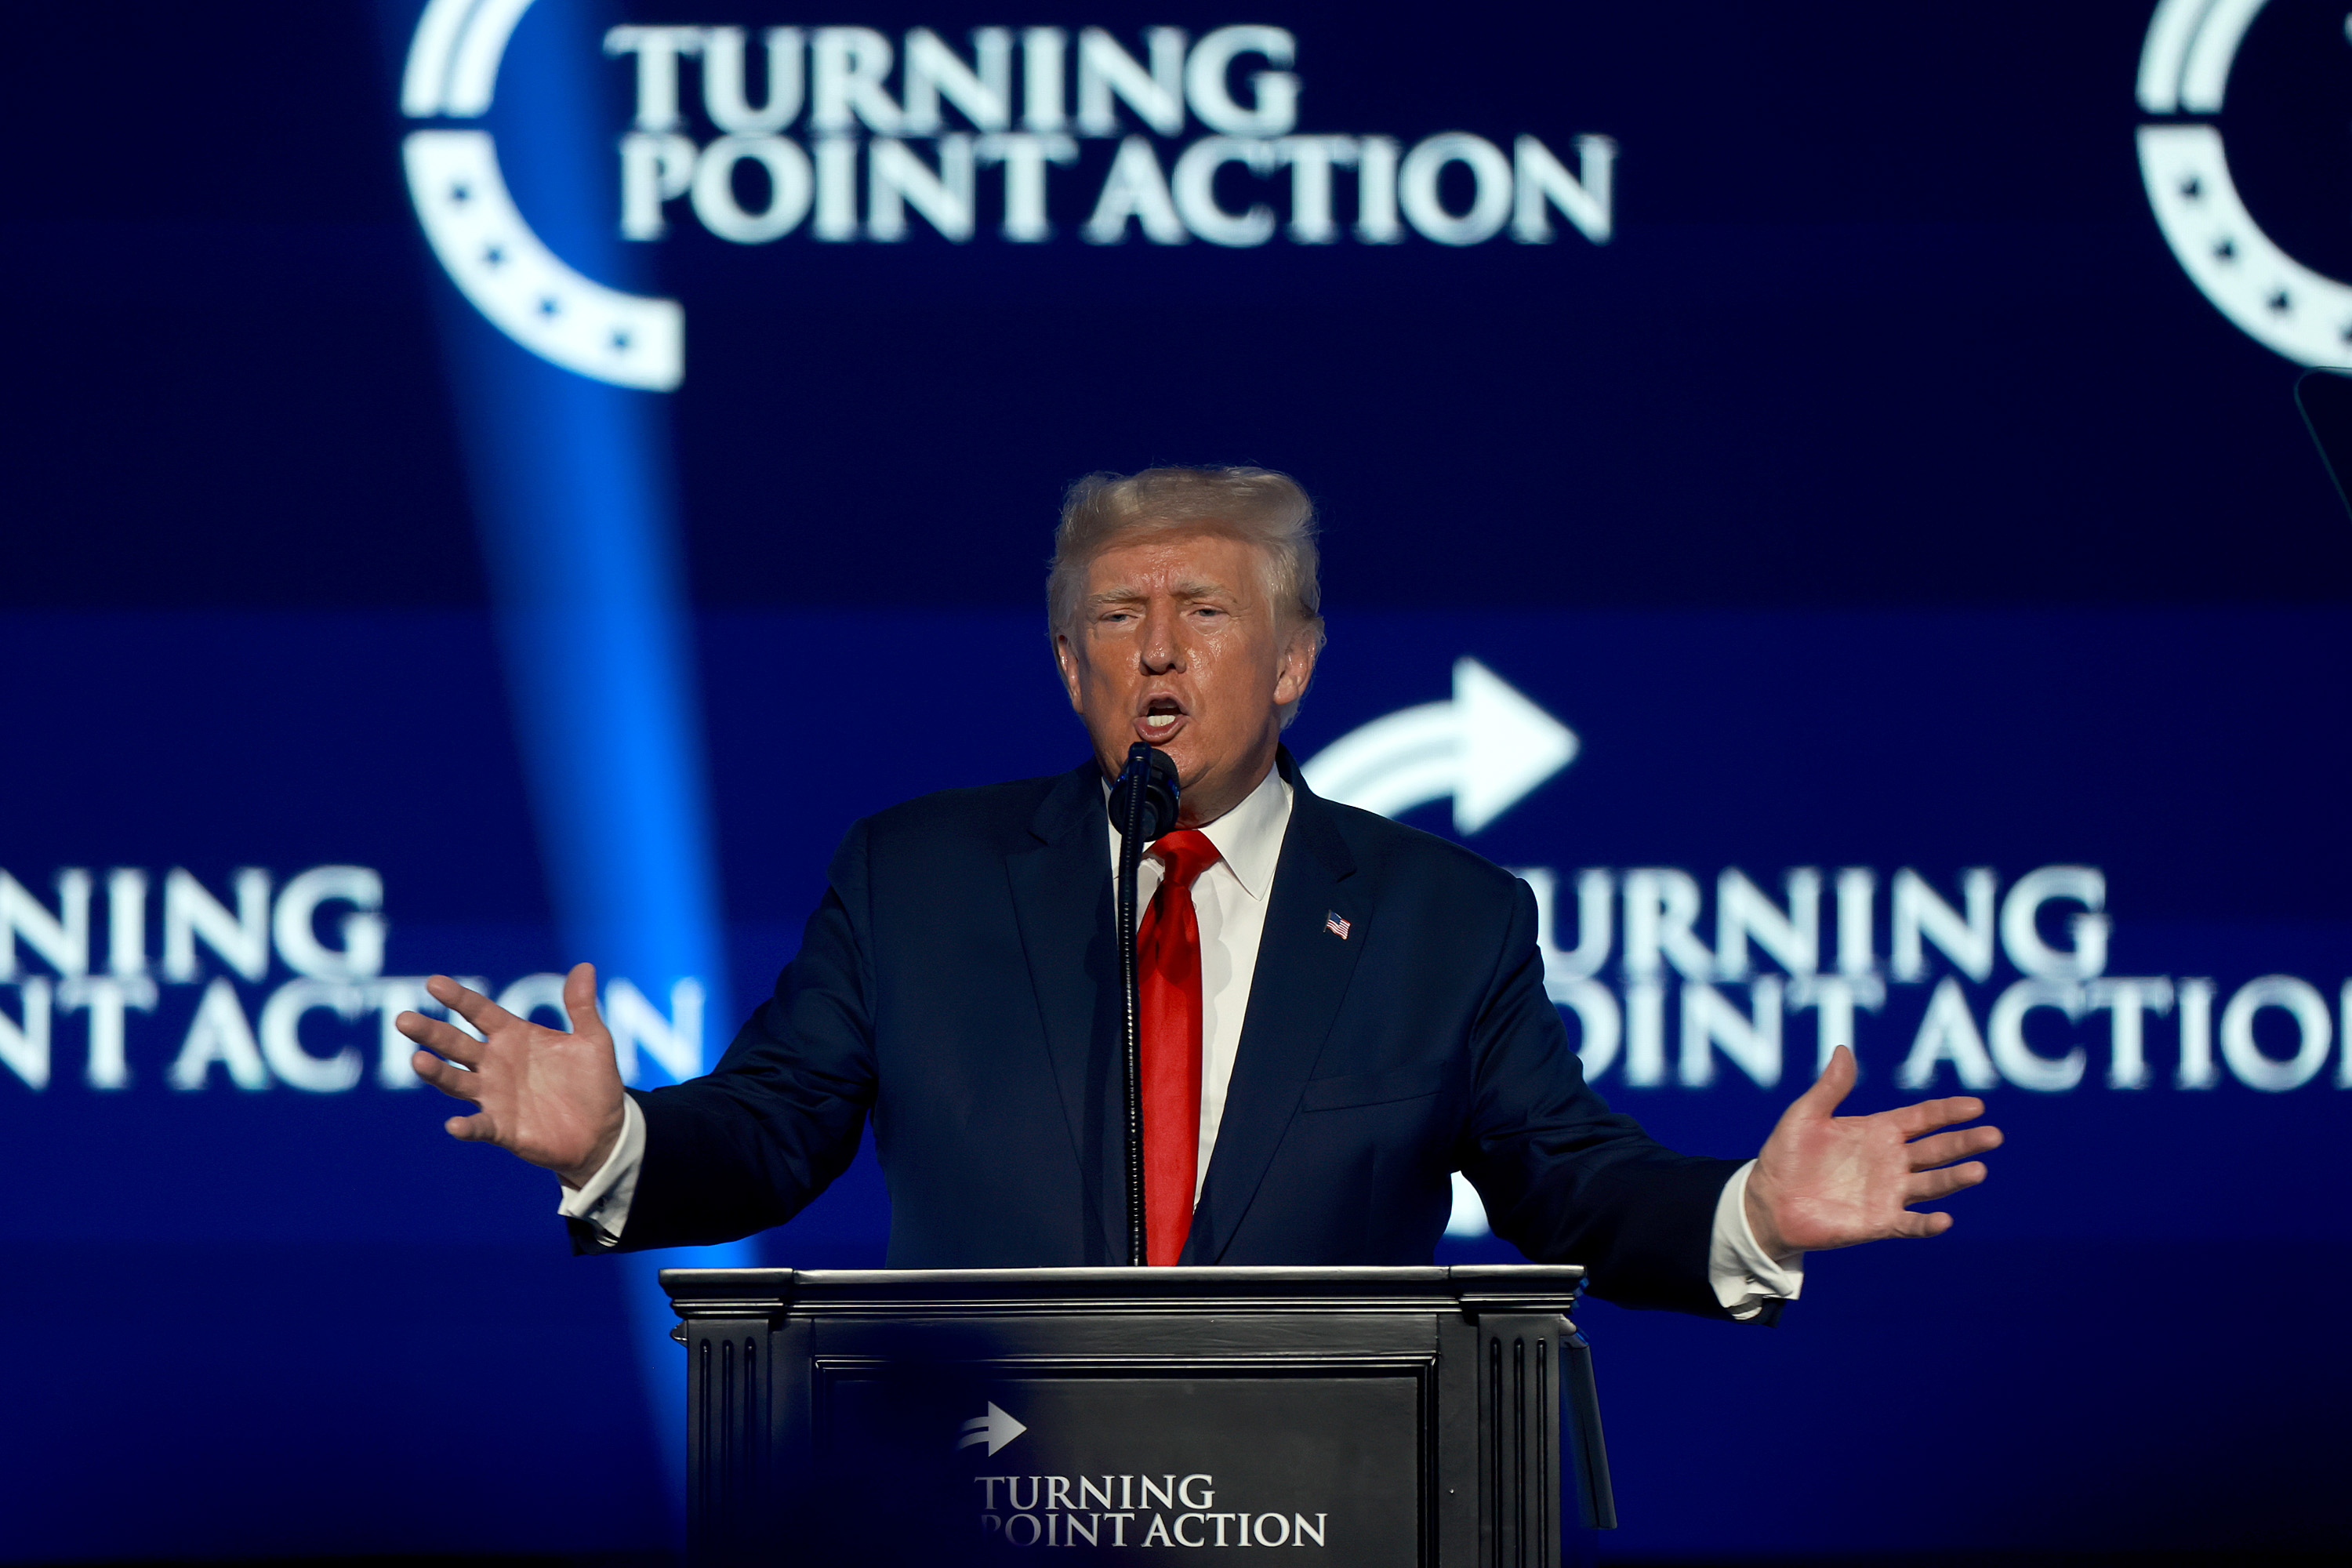 How to Watch Trumps Turning Point Action Speech Time, Livestream Info